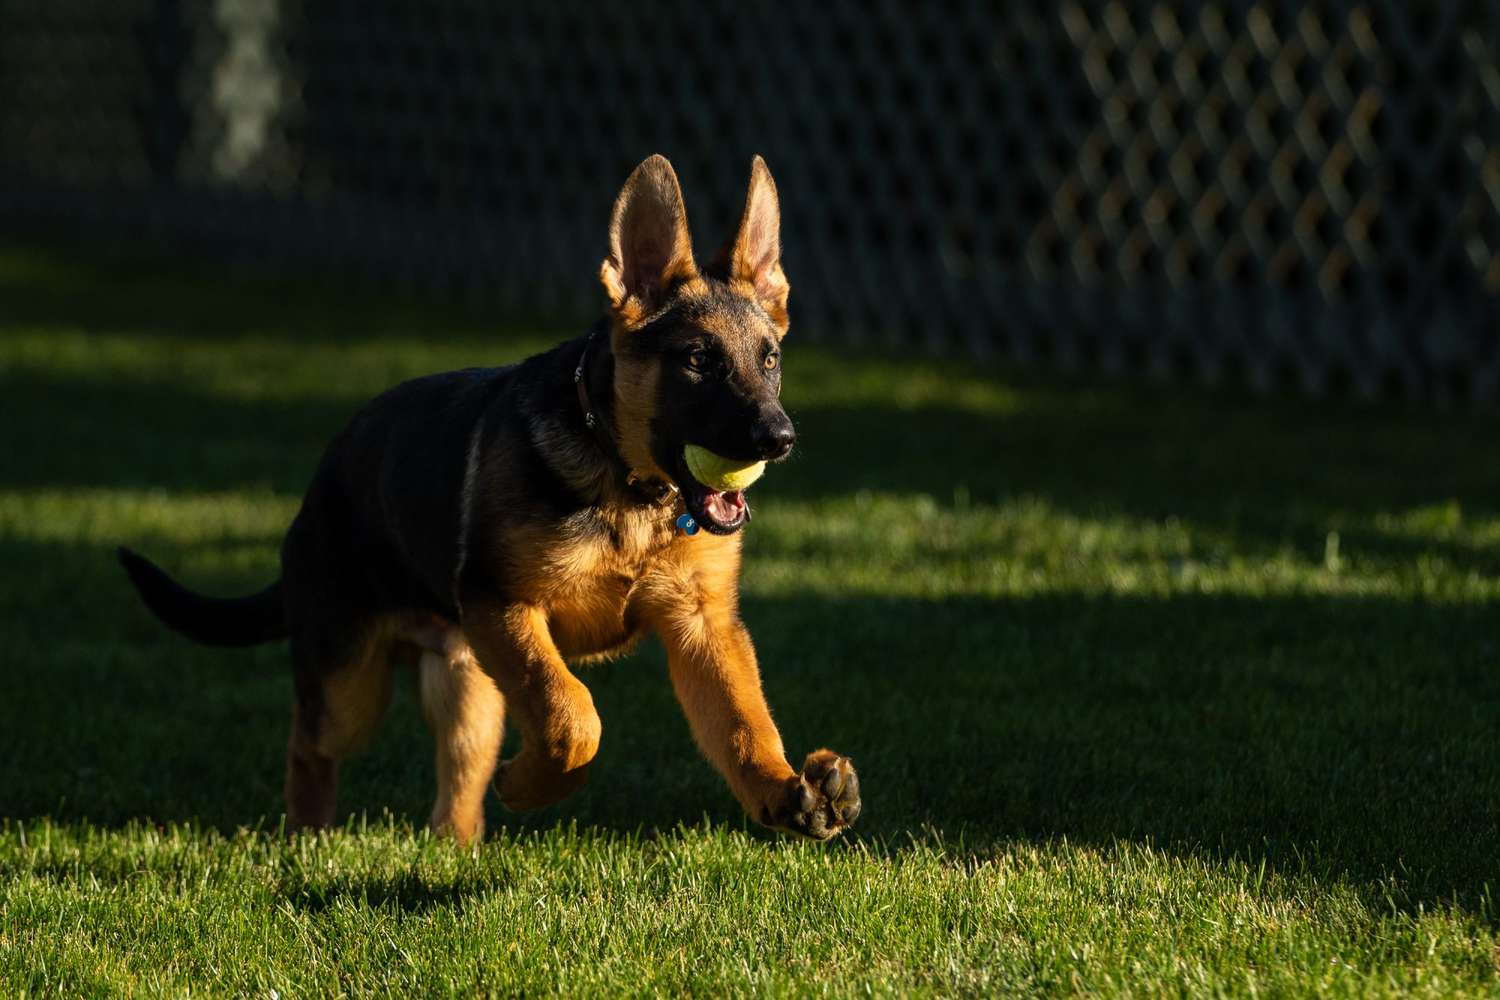 german shepherd puppy runs in grass with tennis ball in mouth